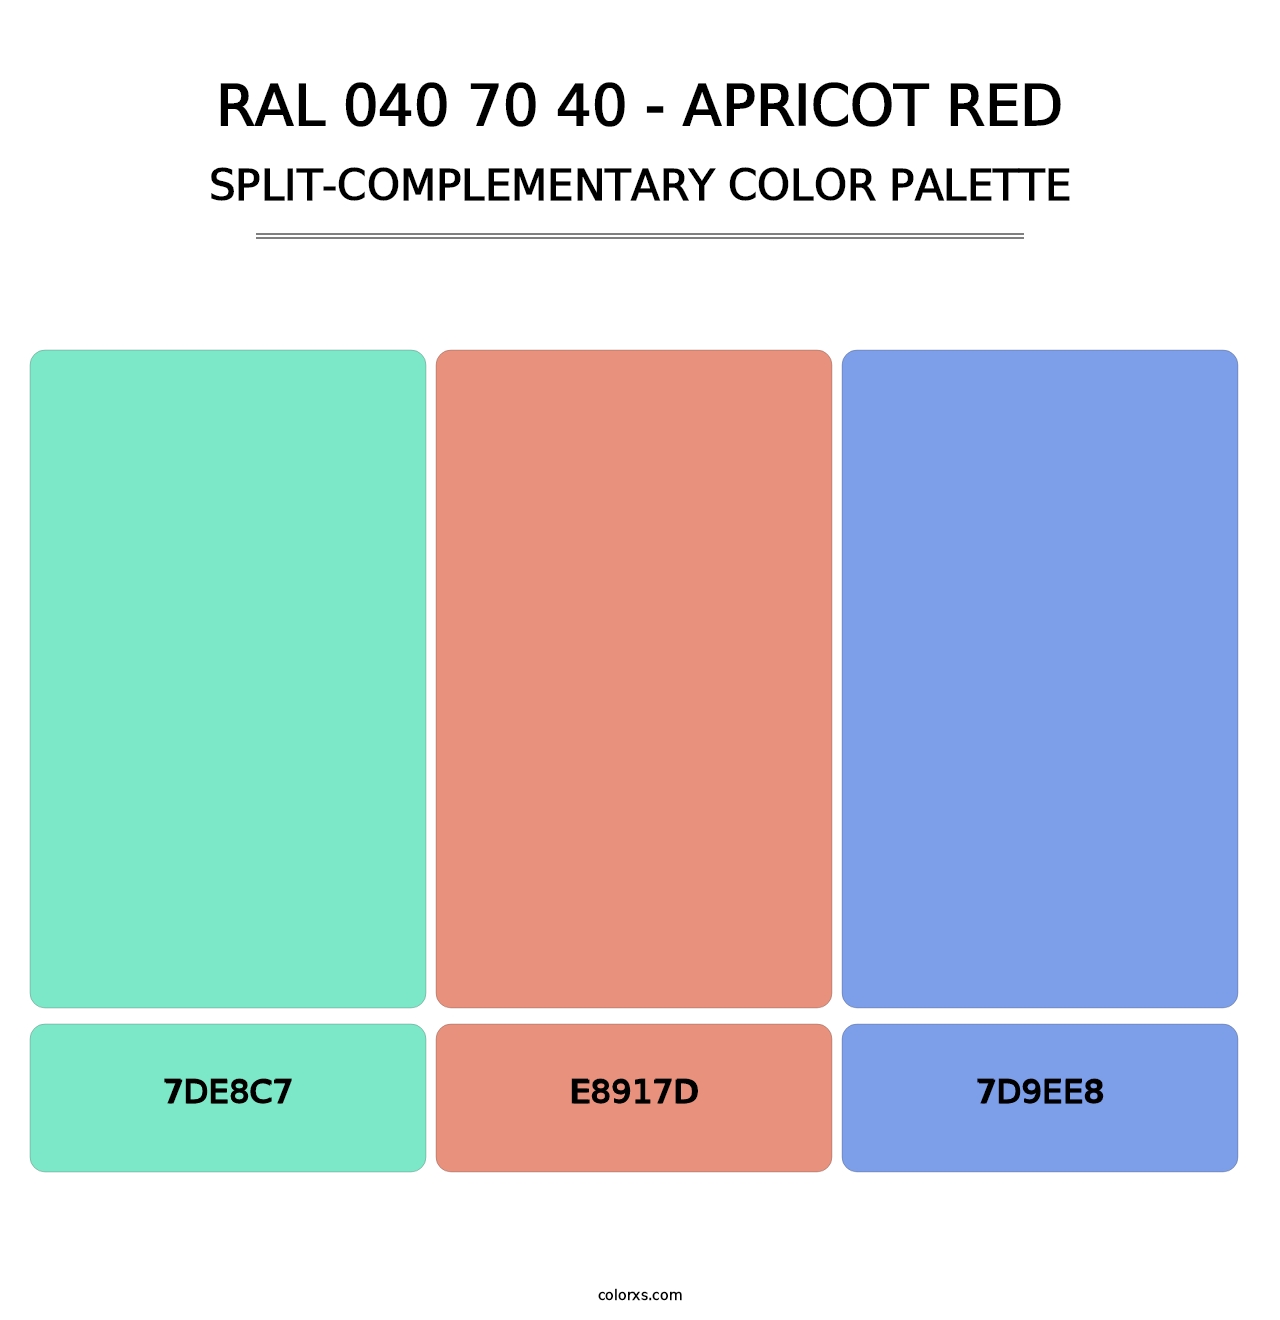 RAL 040 70 40 - Apricot Red - Split-Complementary Color Palette